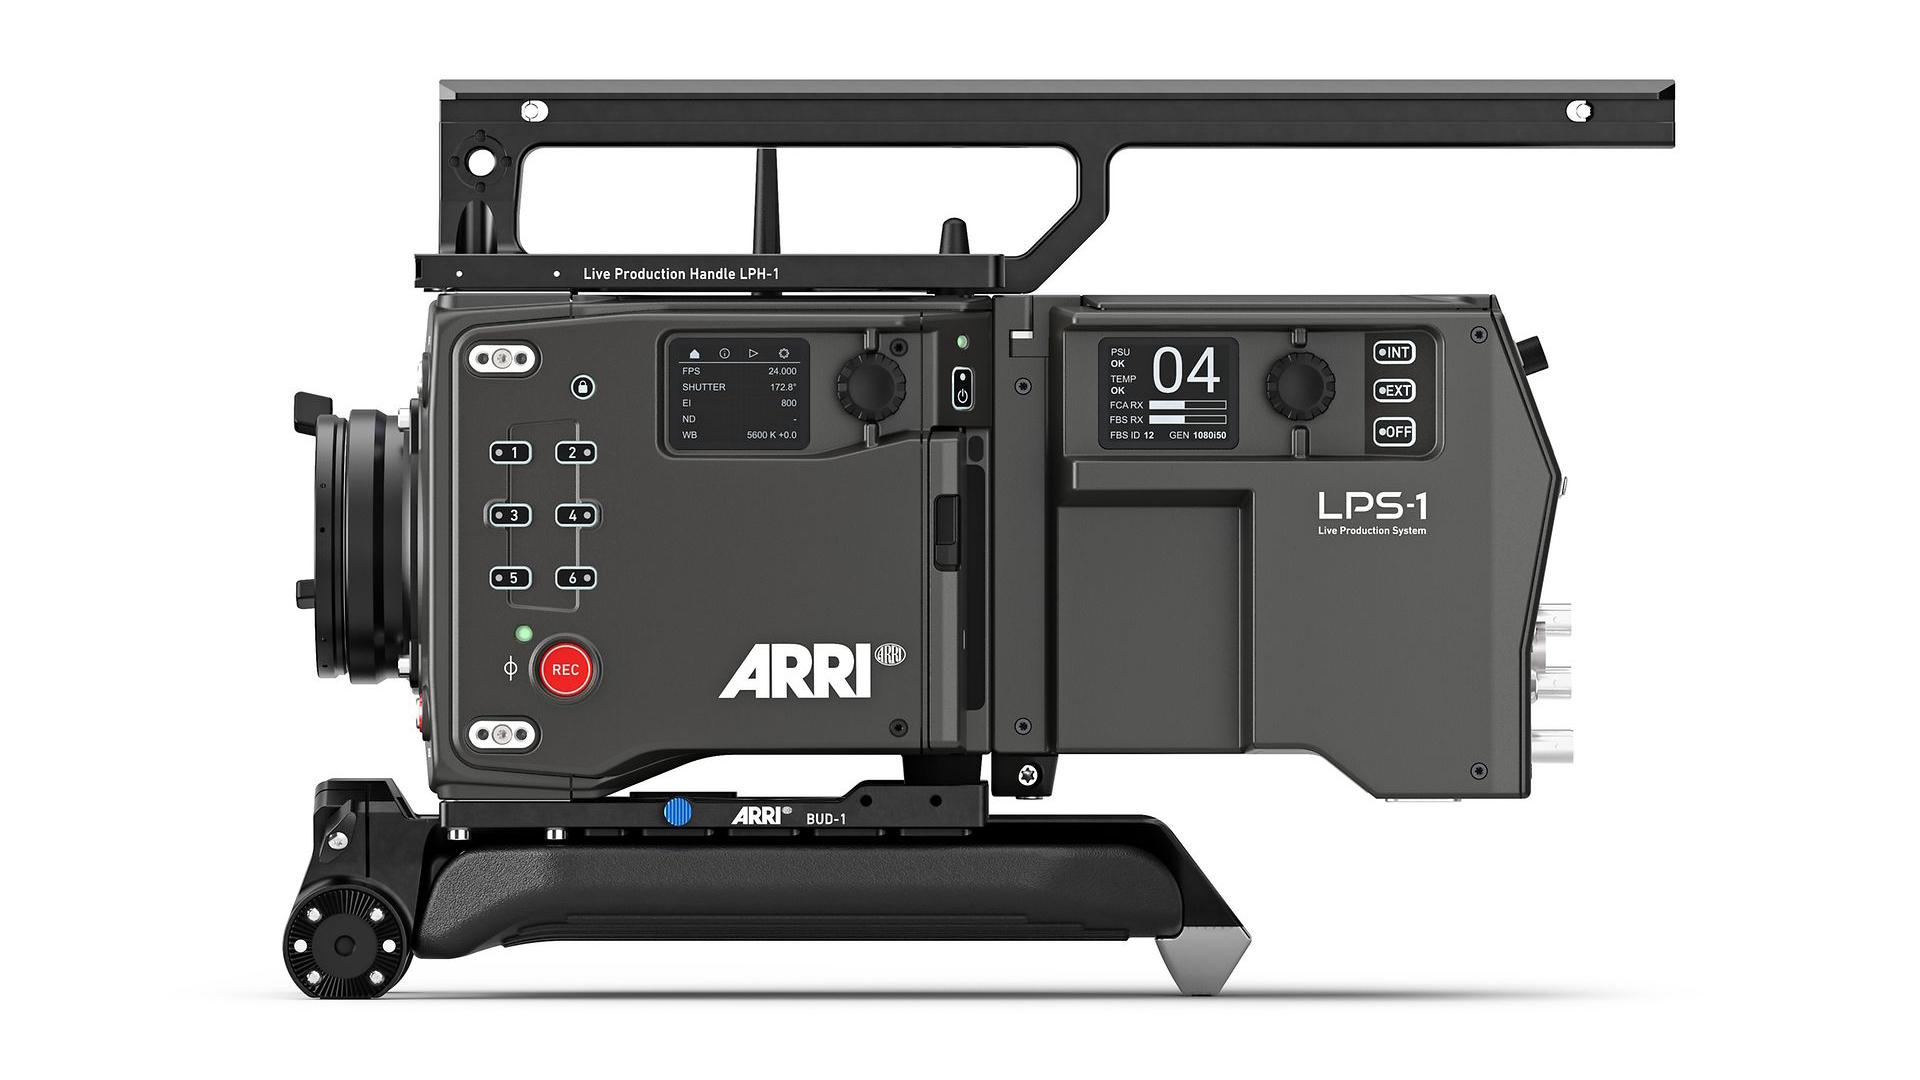 ARRI ALEXA 35 Live – Multicam System Introduced – Cinematic Quality for the Live Entertainment Sector